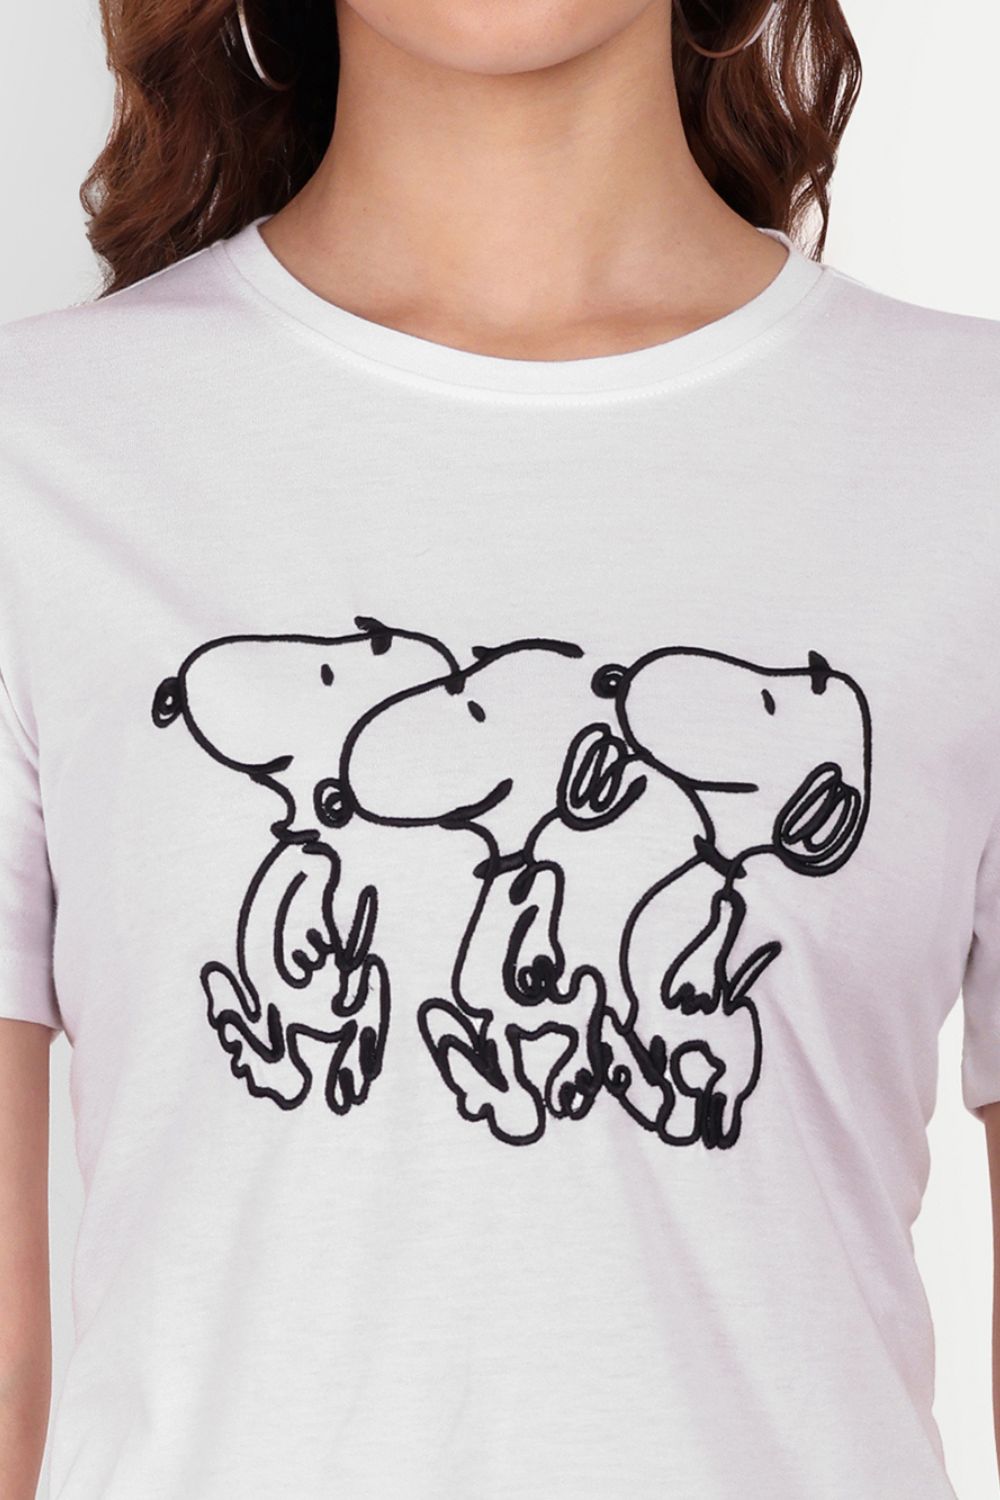 Snoopy embroidery T-shirt